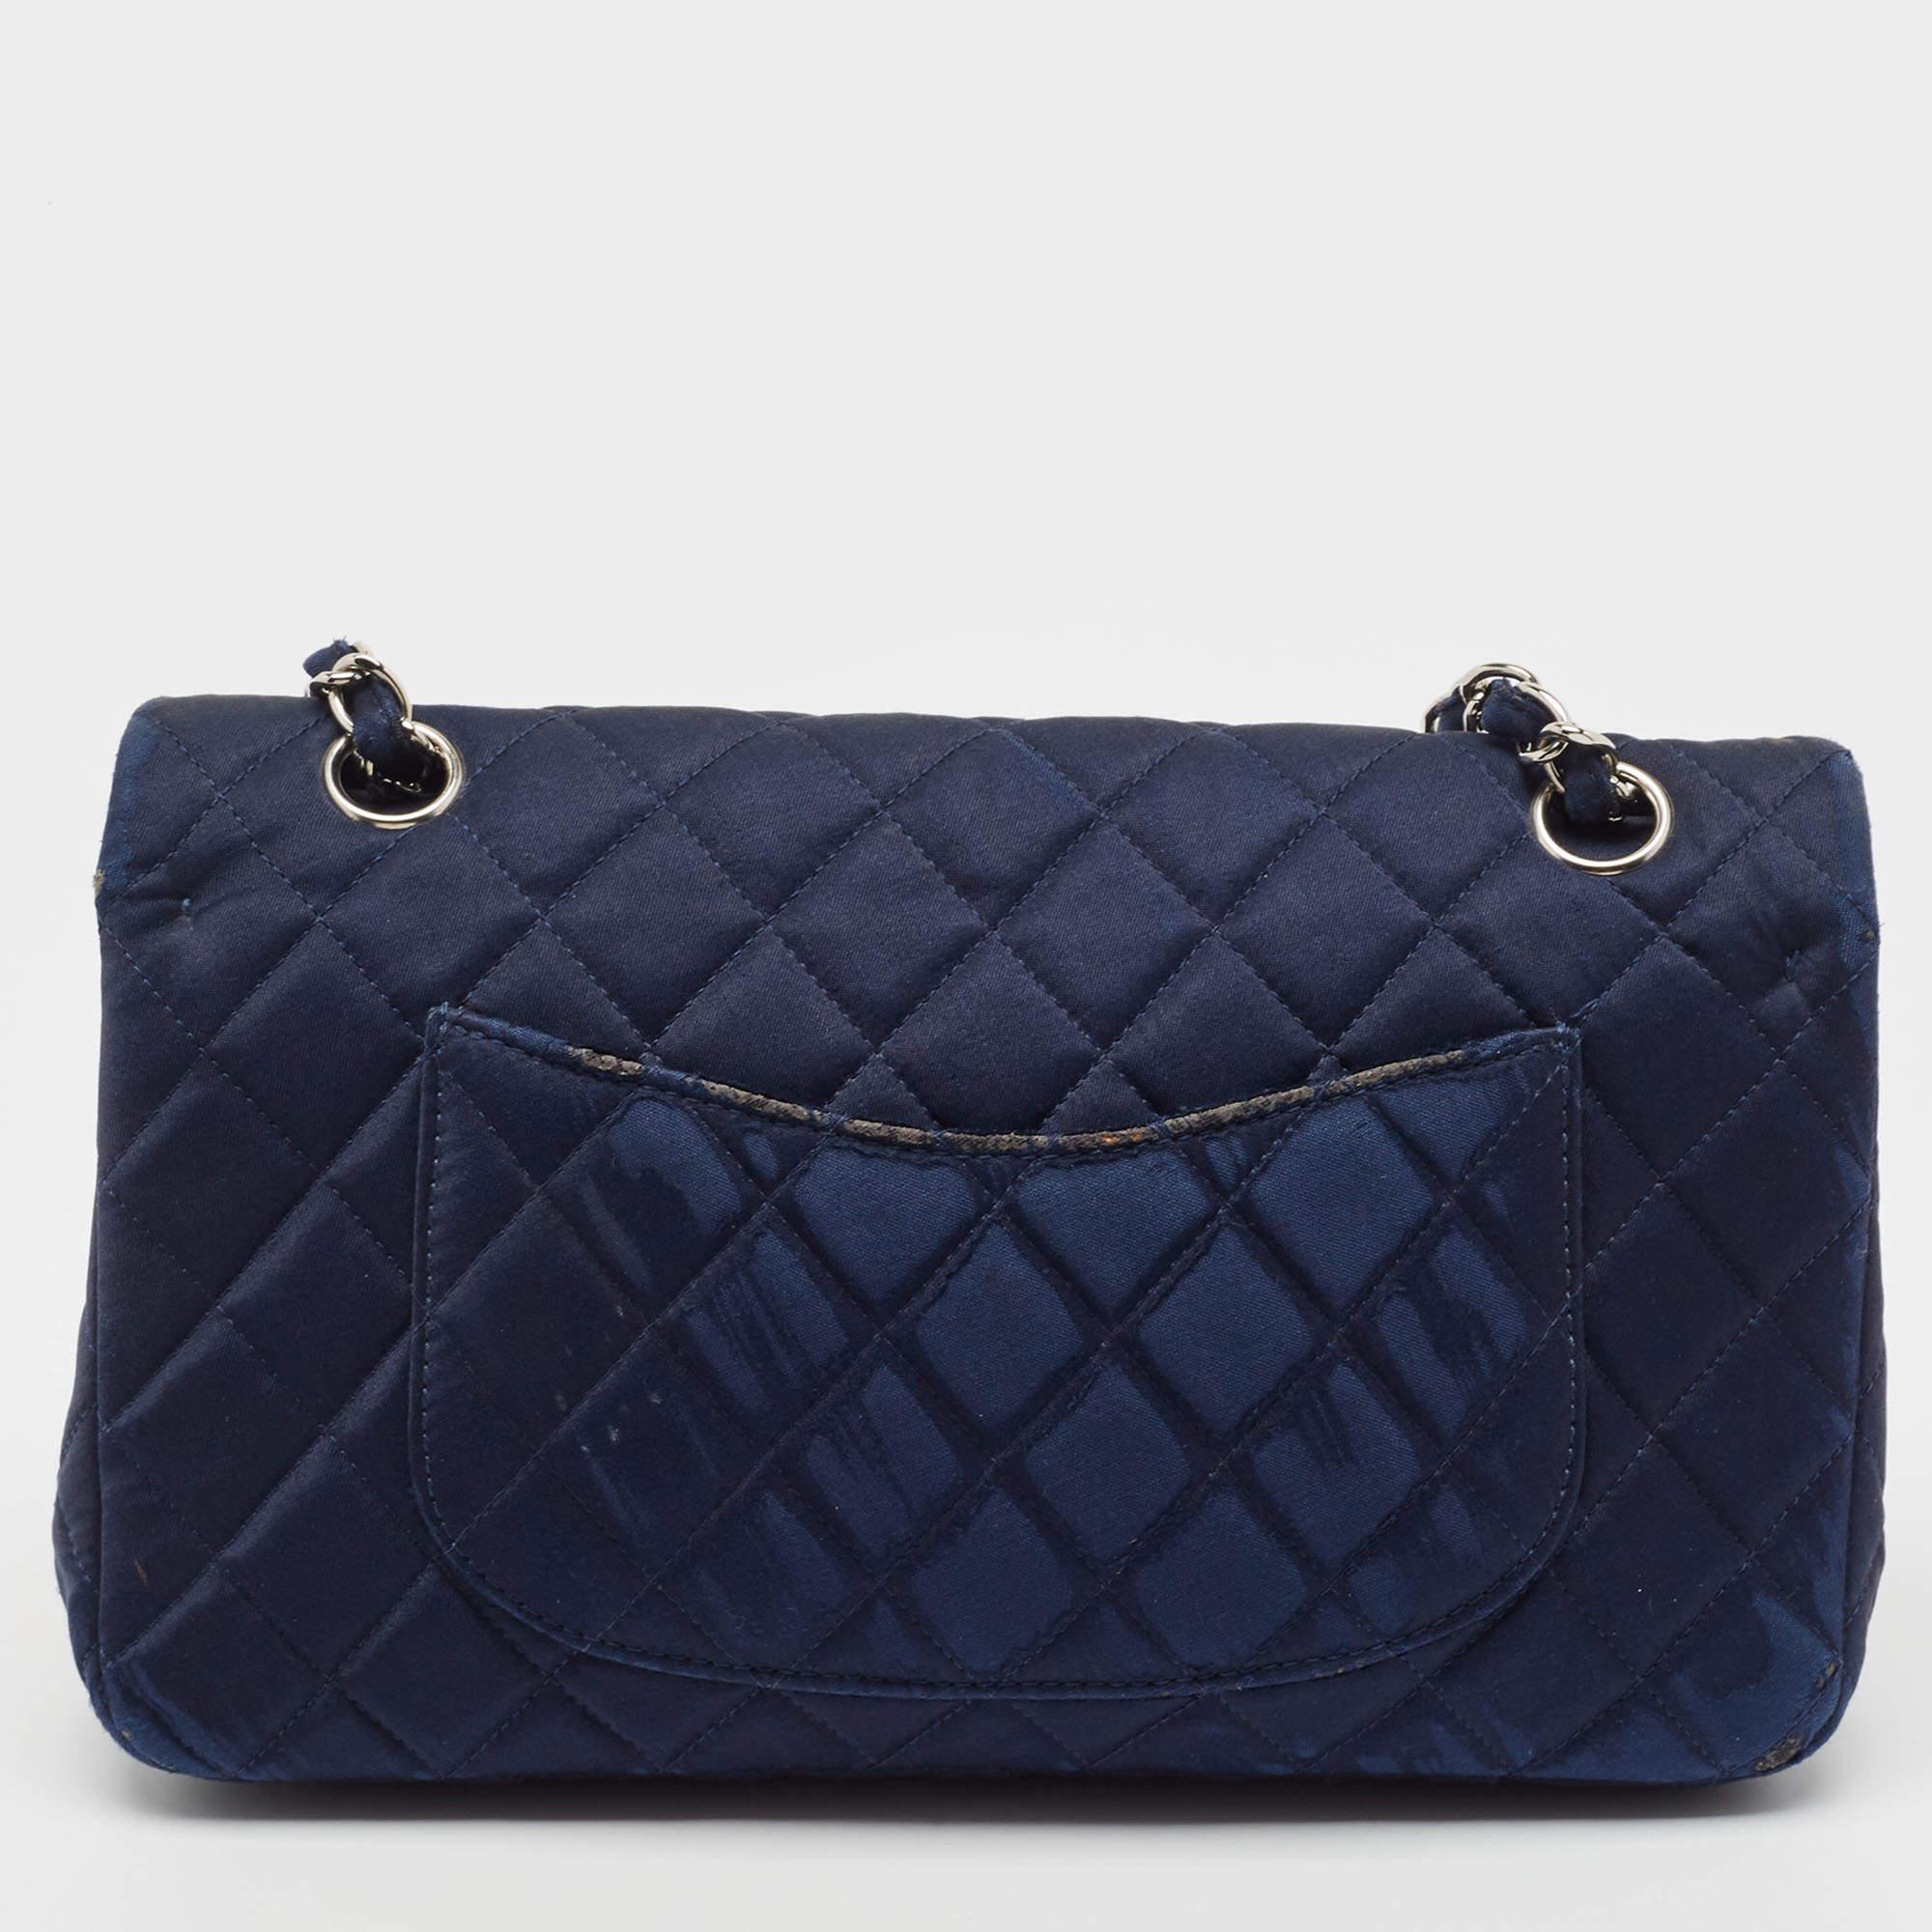 Chanel Navy Blue Quilted Satin Medium Classic Double Flap Bag 3